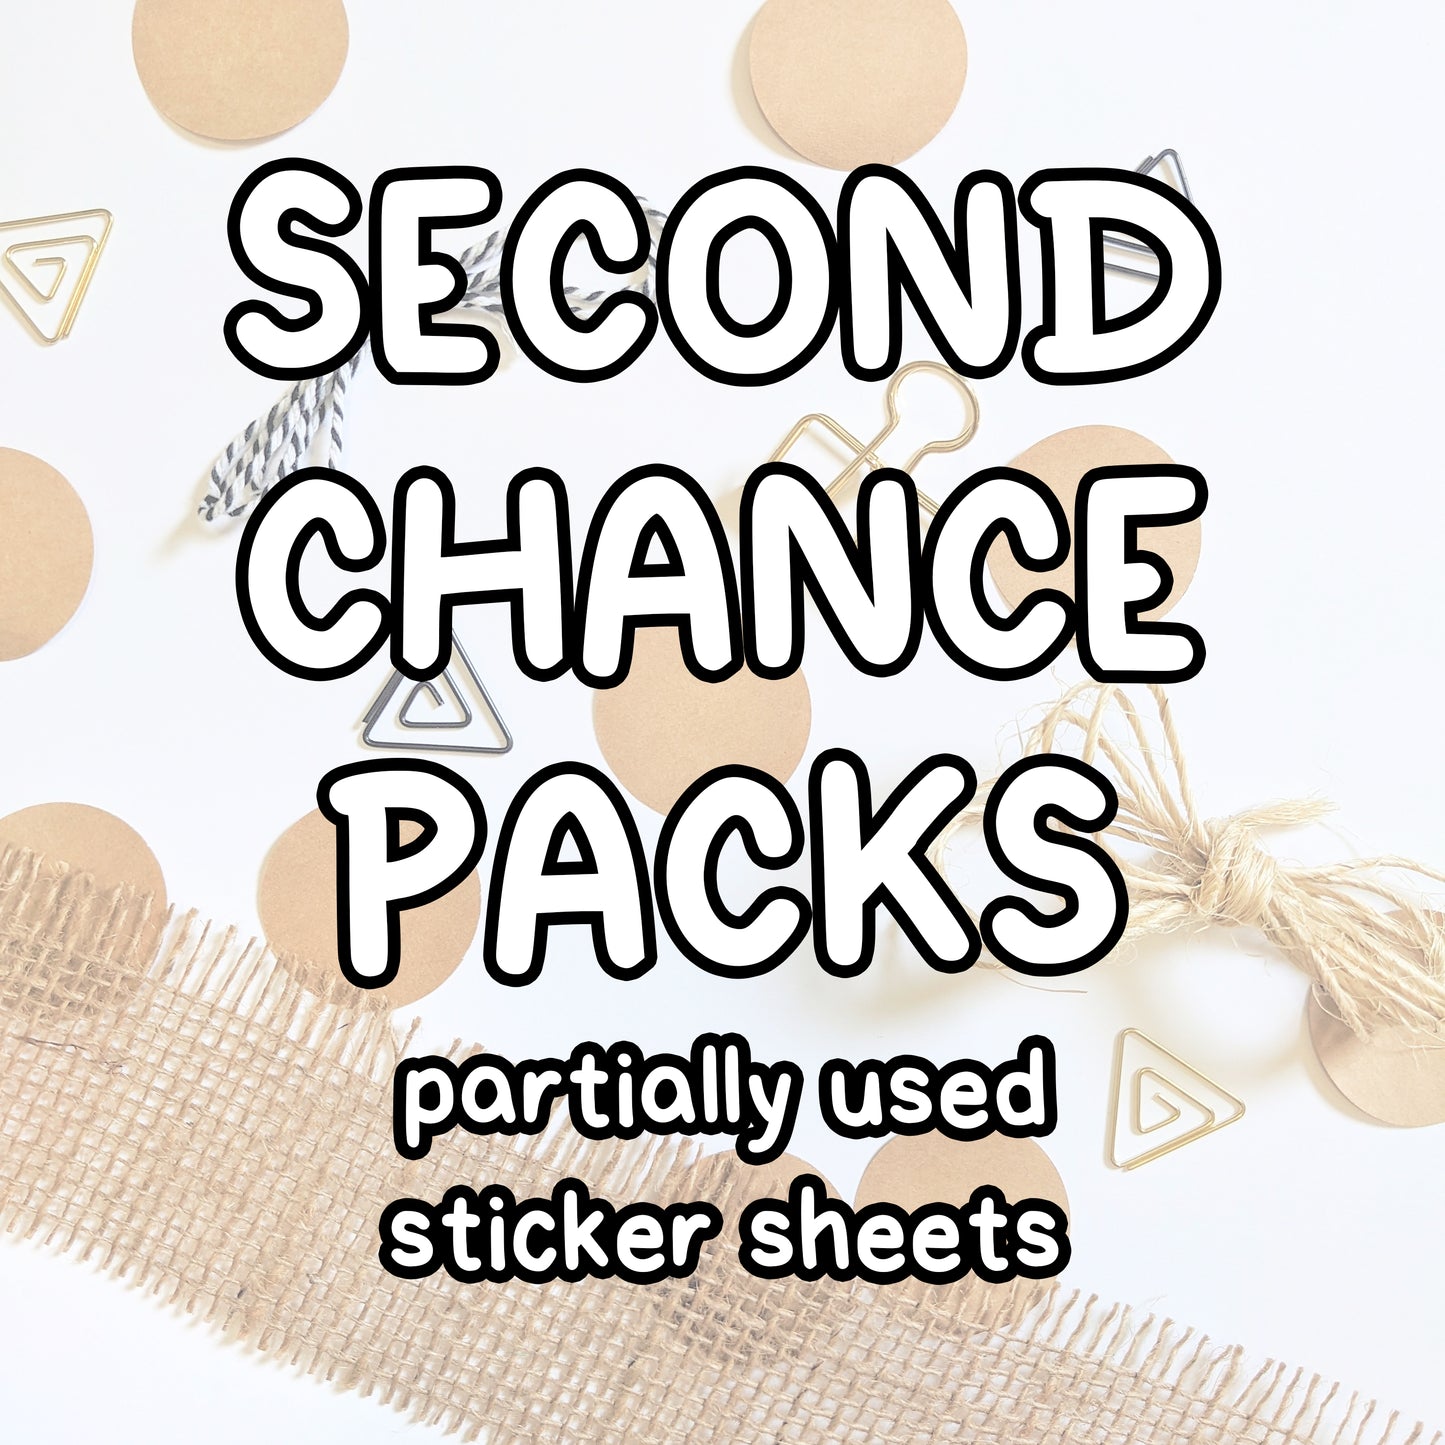 Second Chance Packs! 11 Partially Used Sticker Sheets